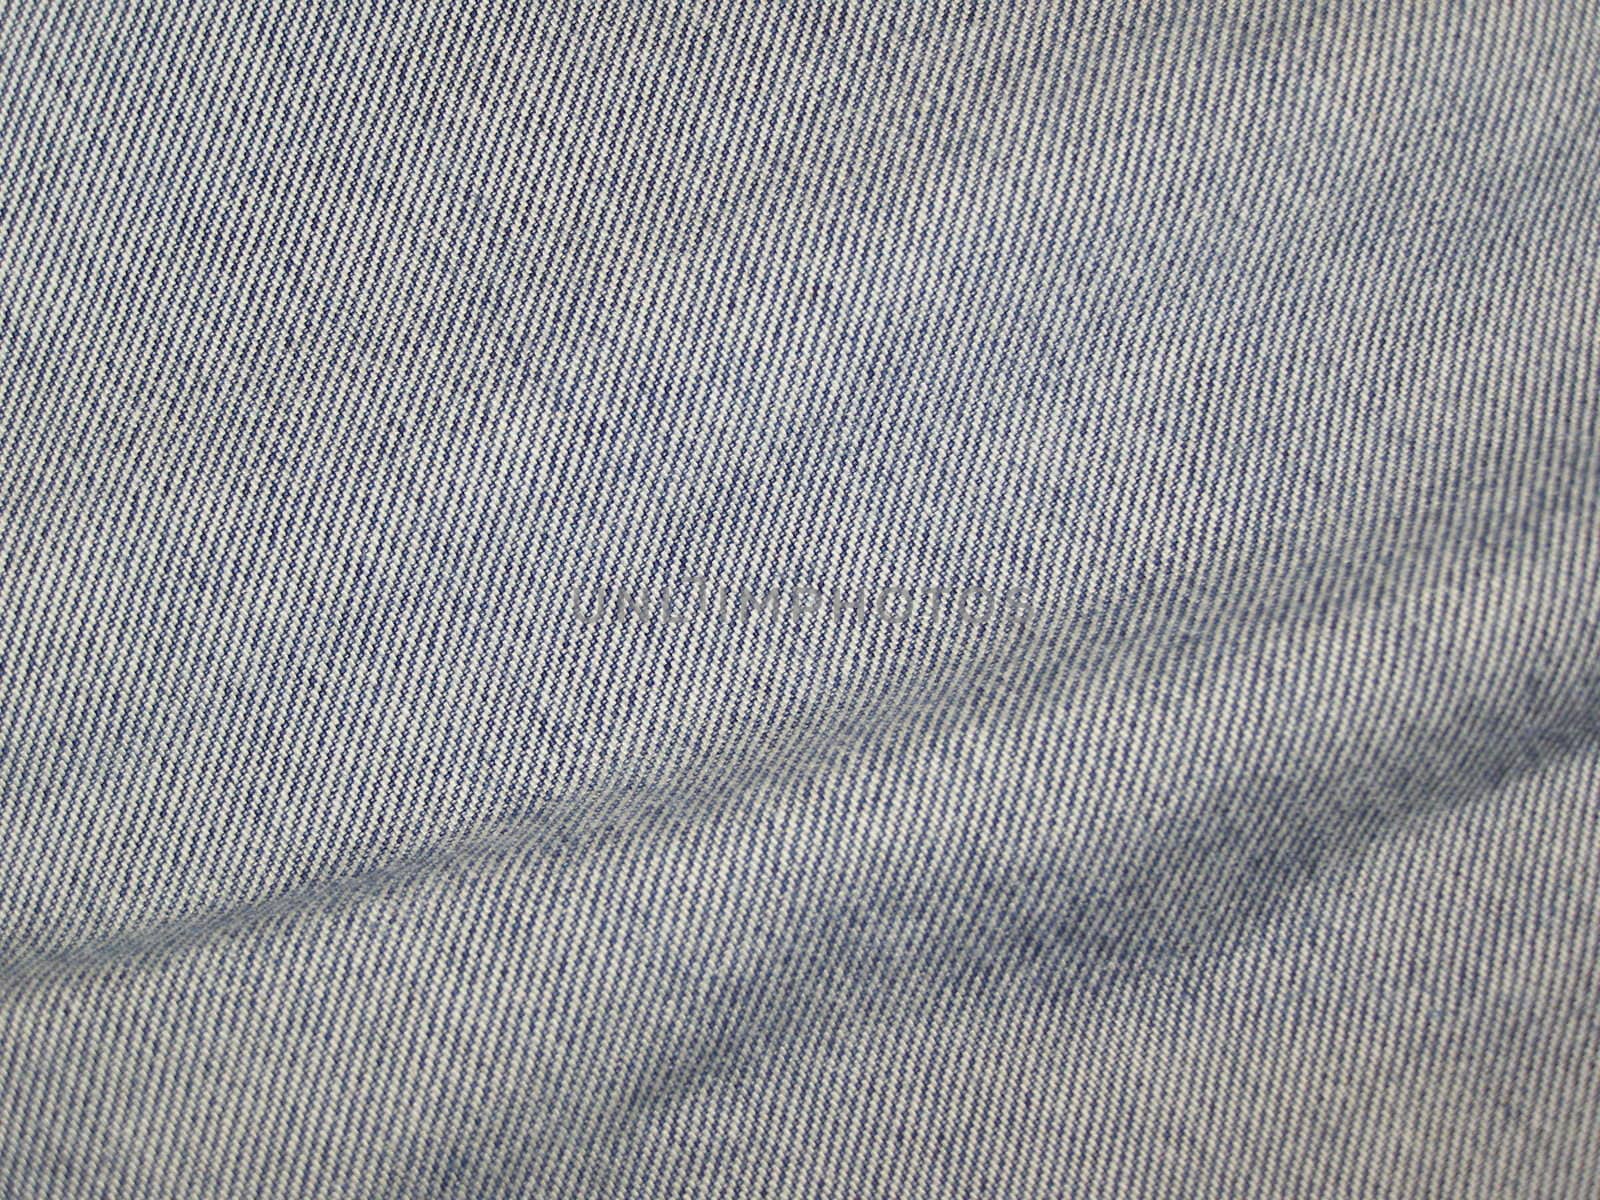 American blue jeans texture useful as a background